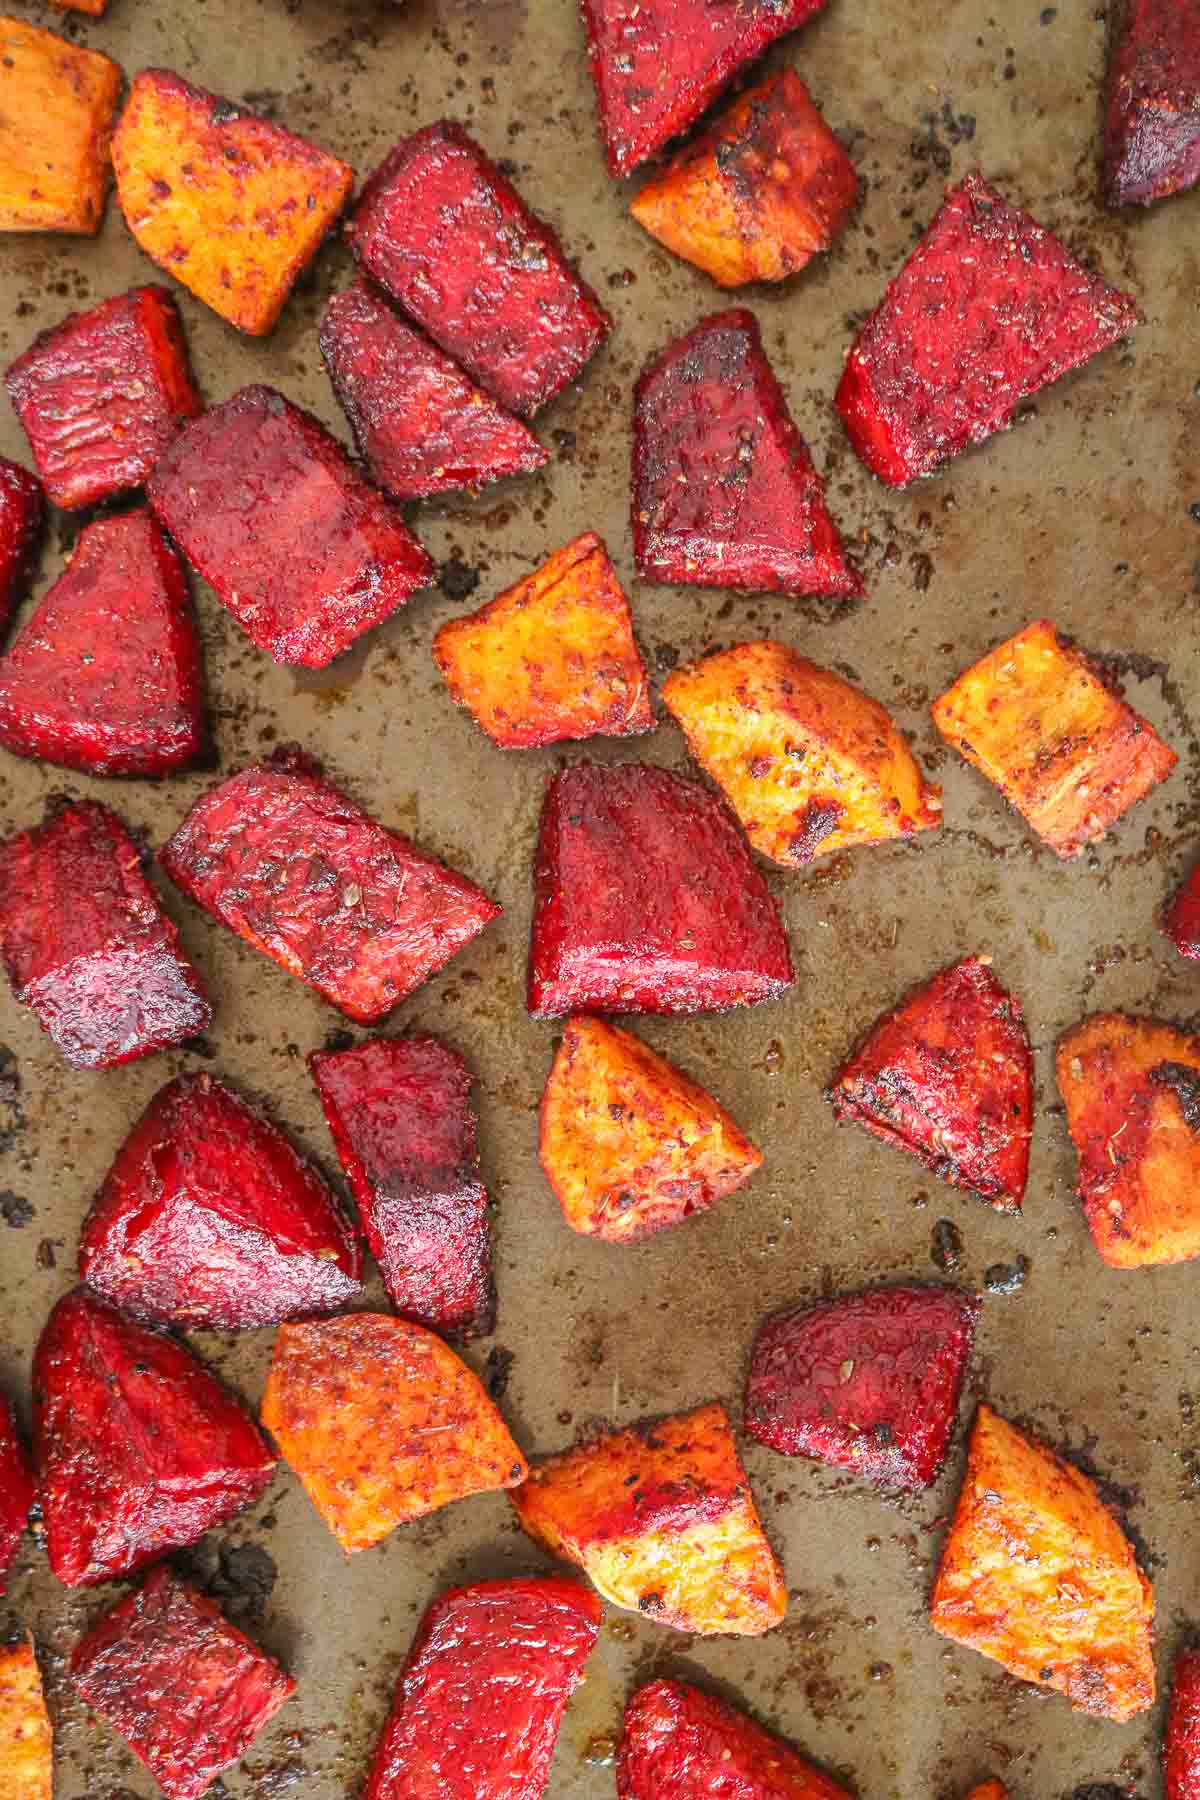 Chunks of roasted beets and sweet potatoes on a sheet pan.